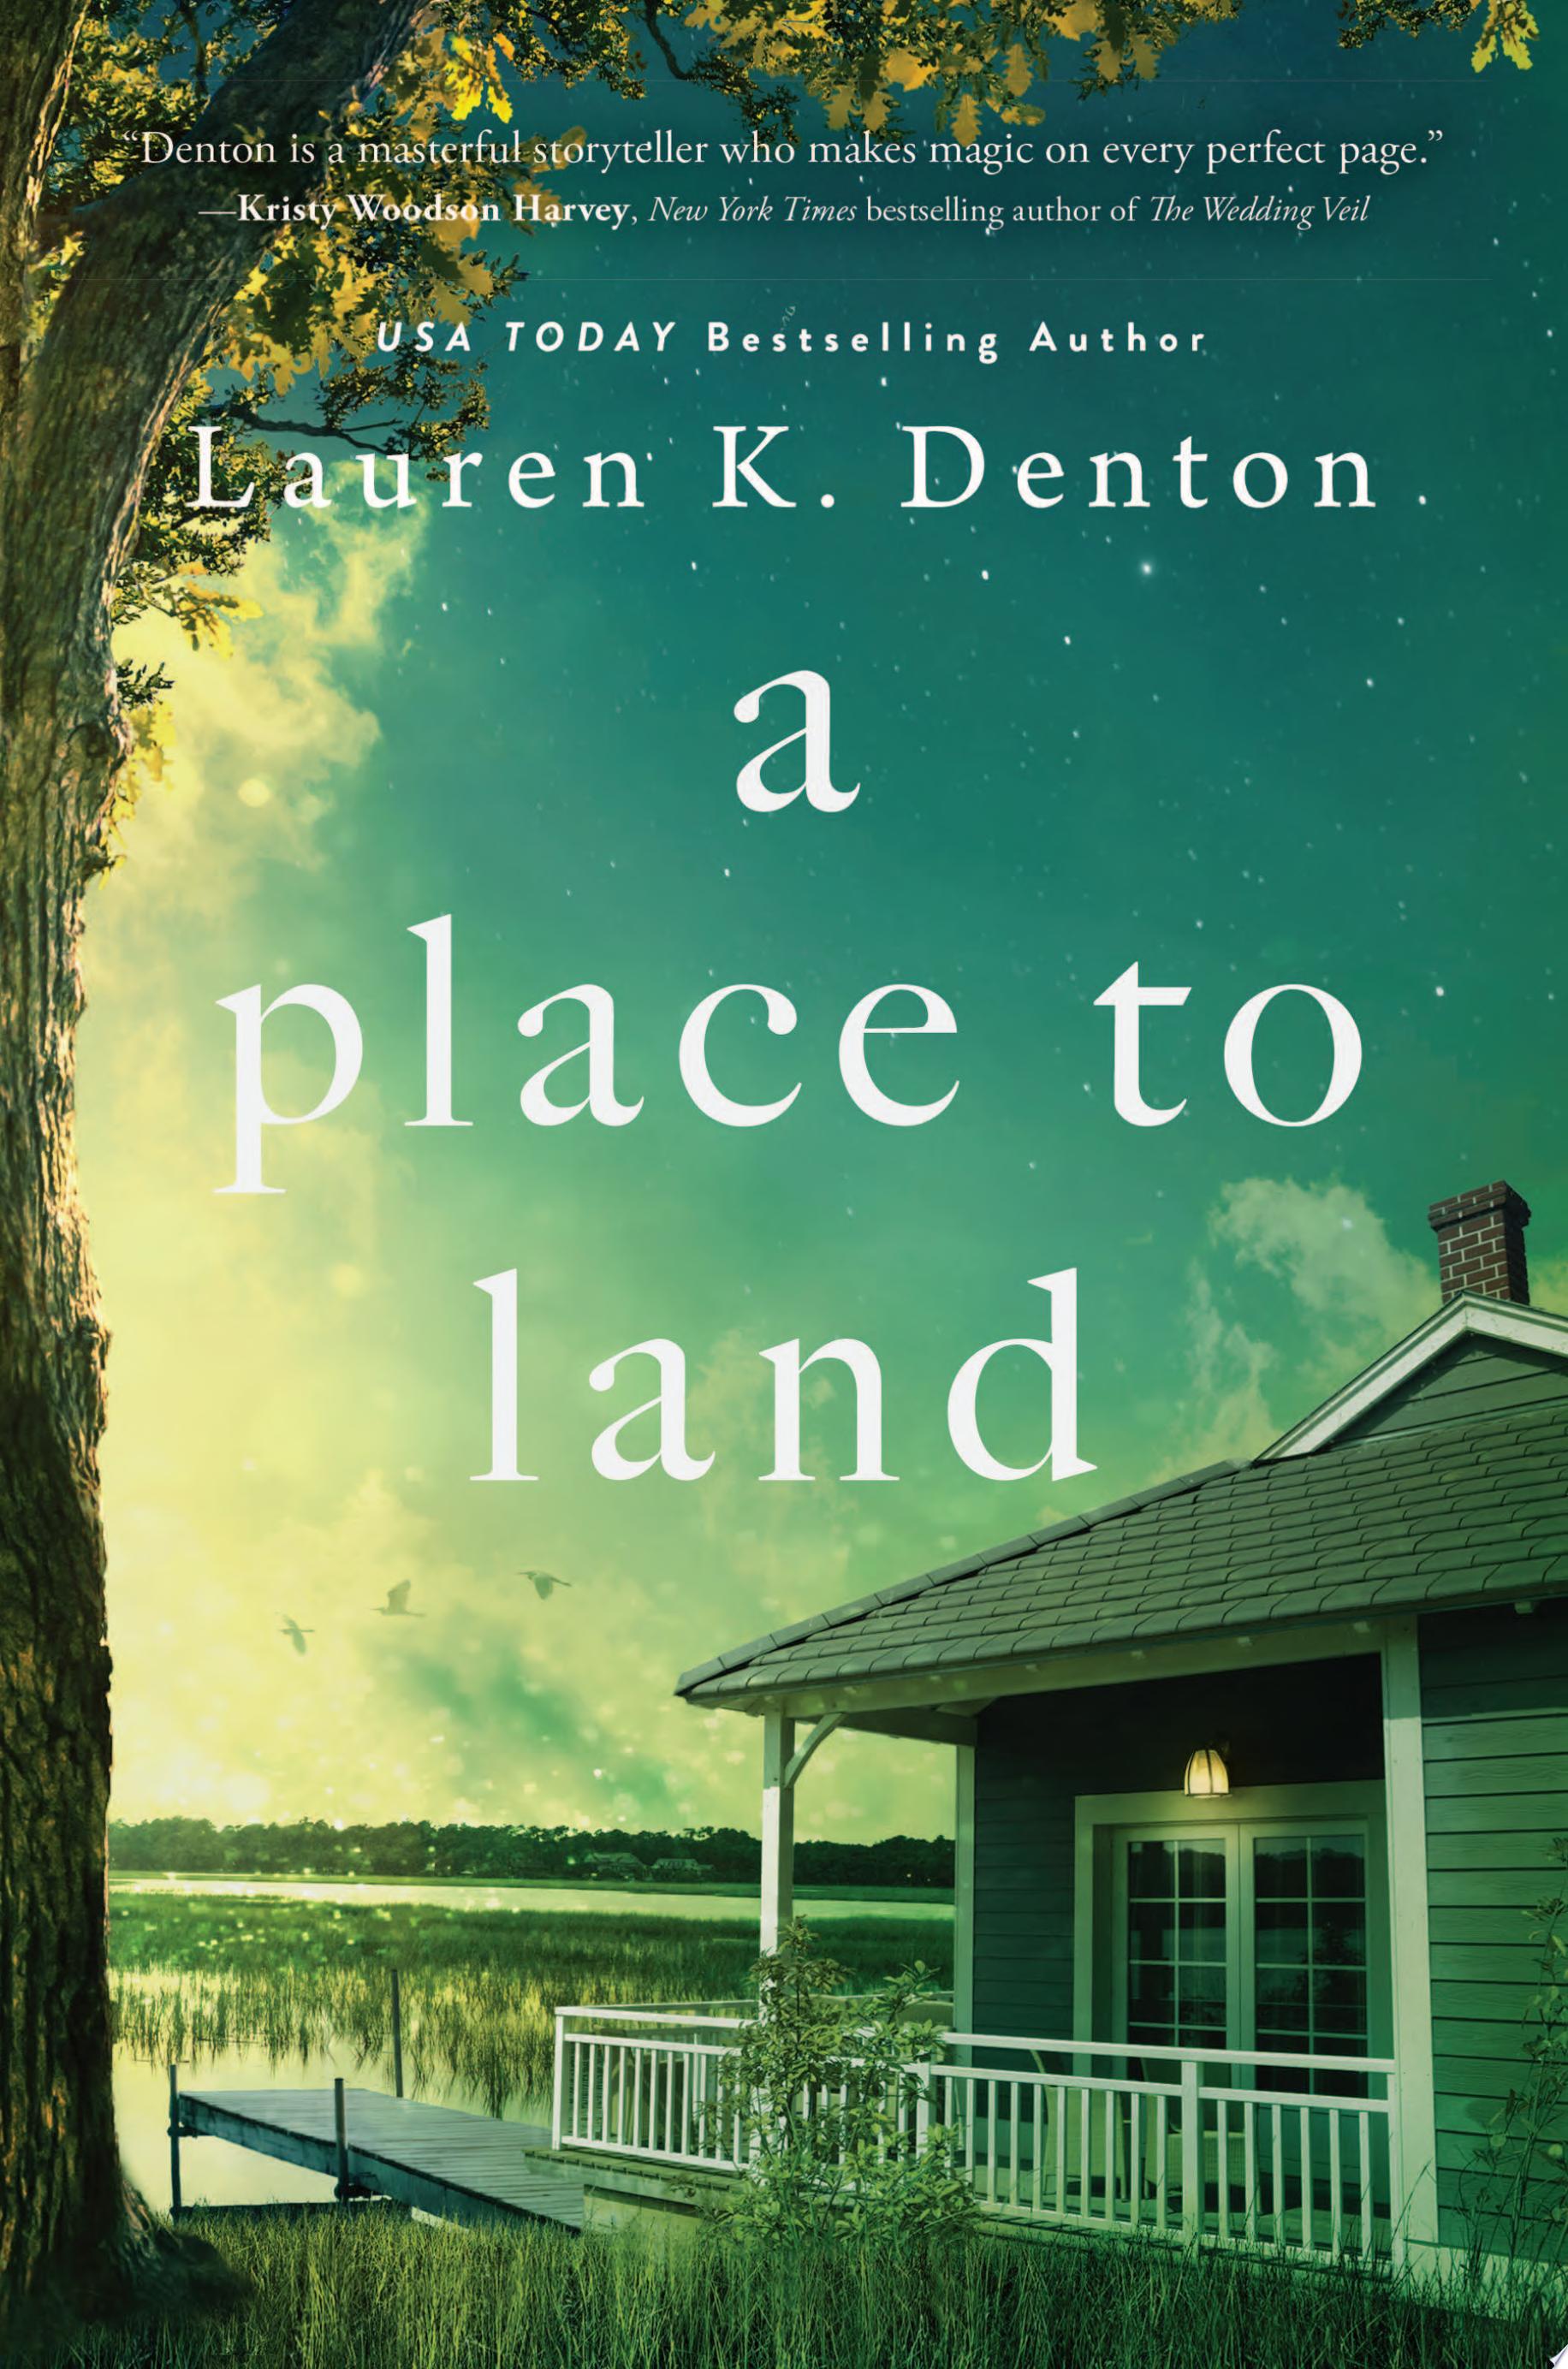 Image for "A Place to Land"